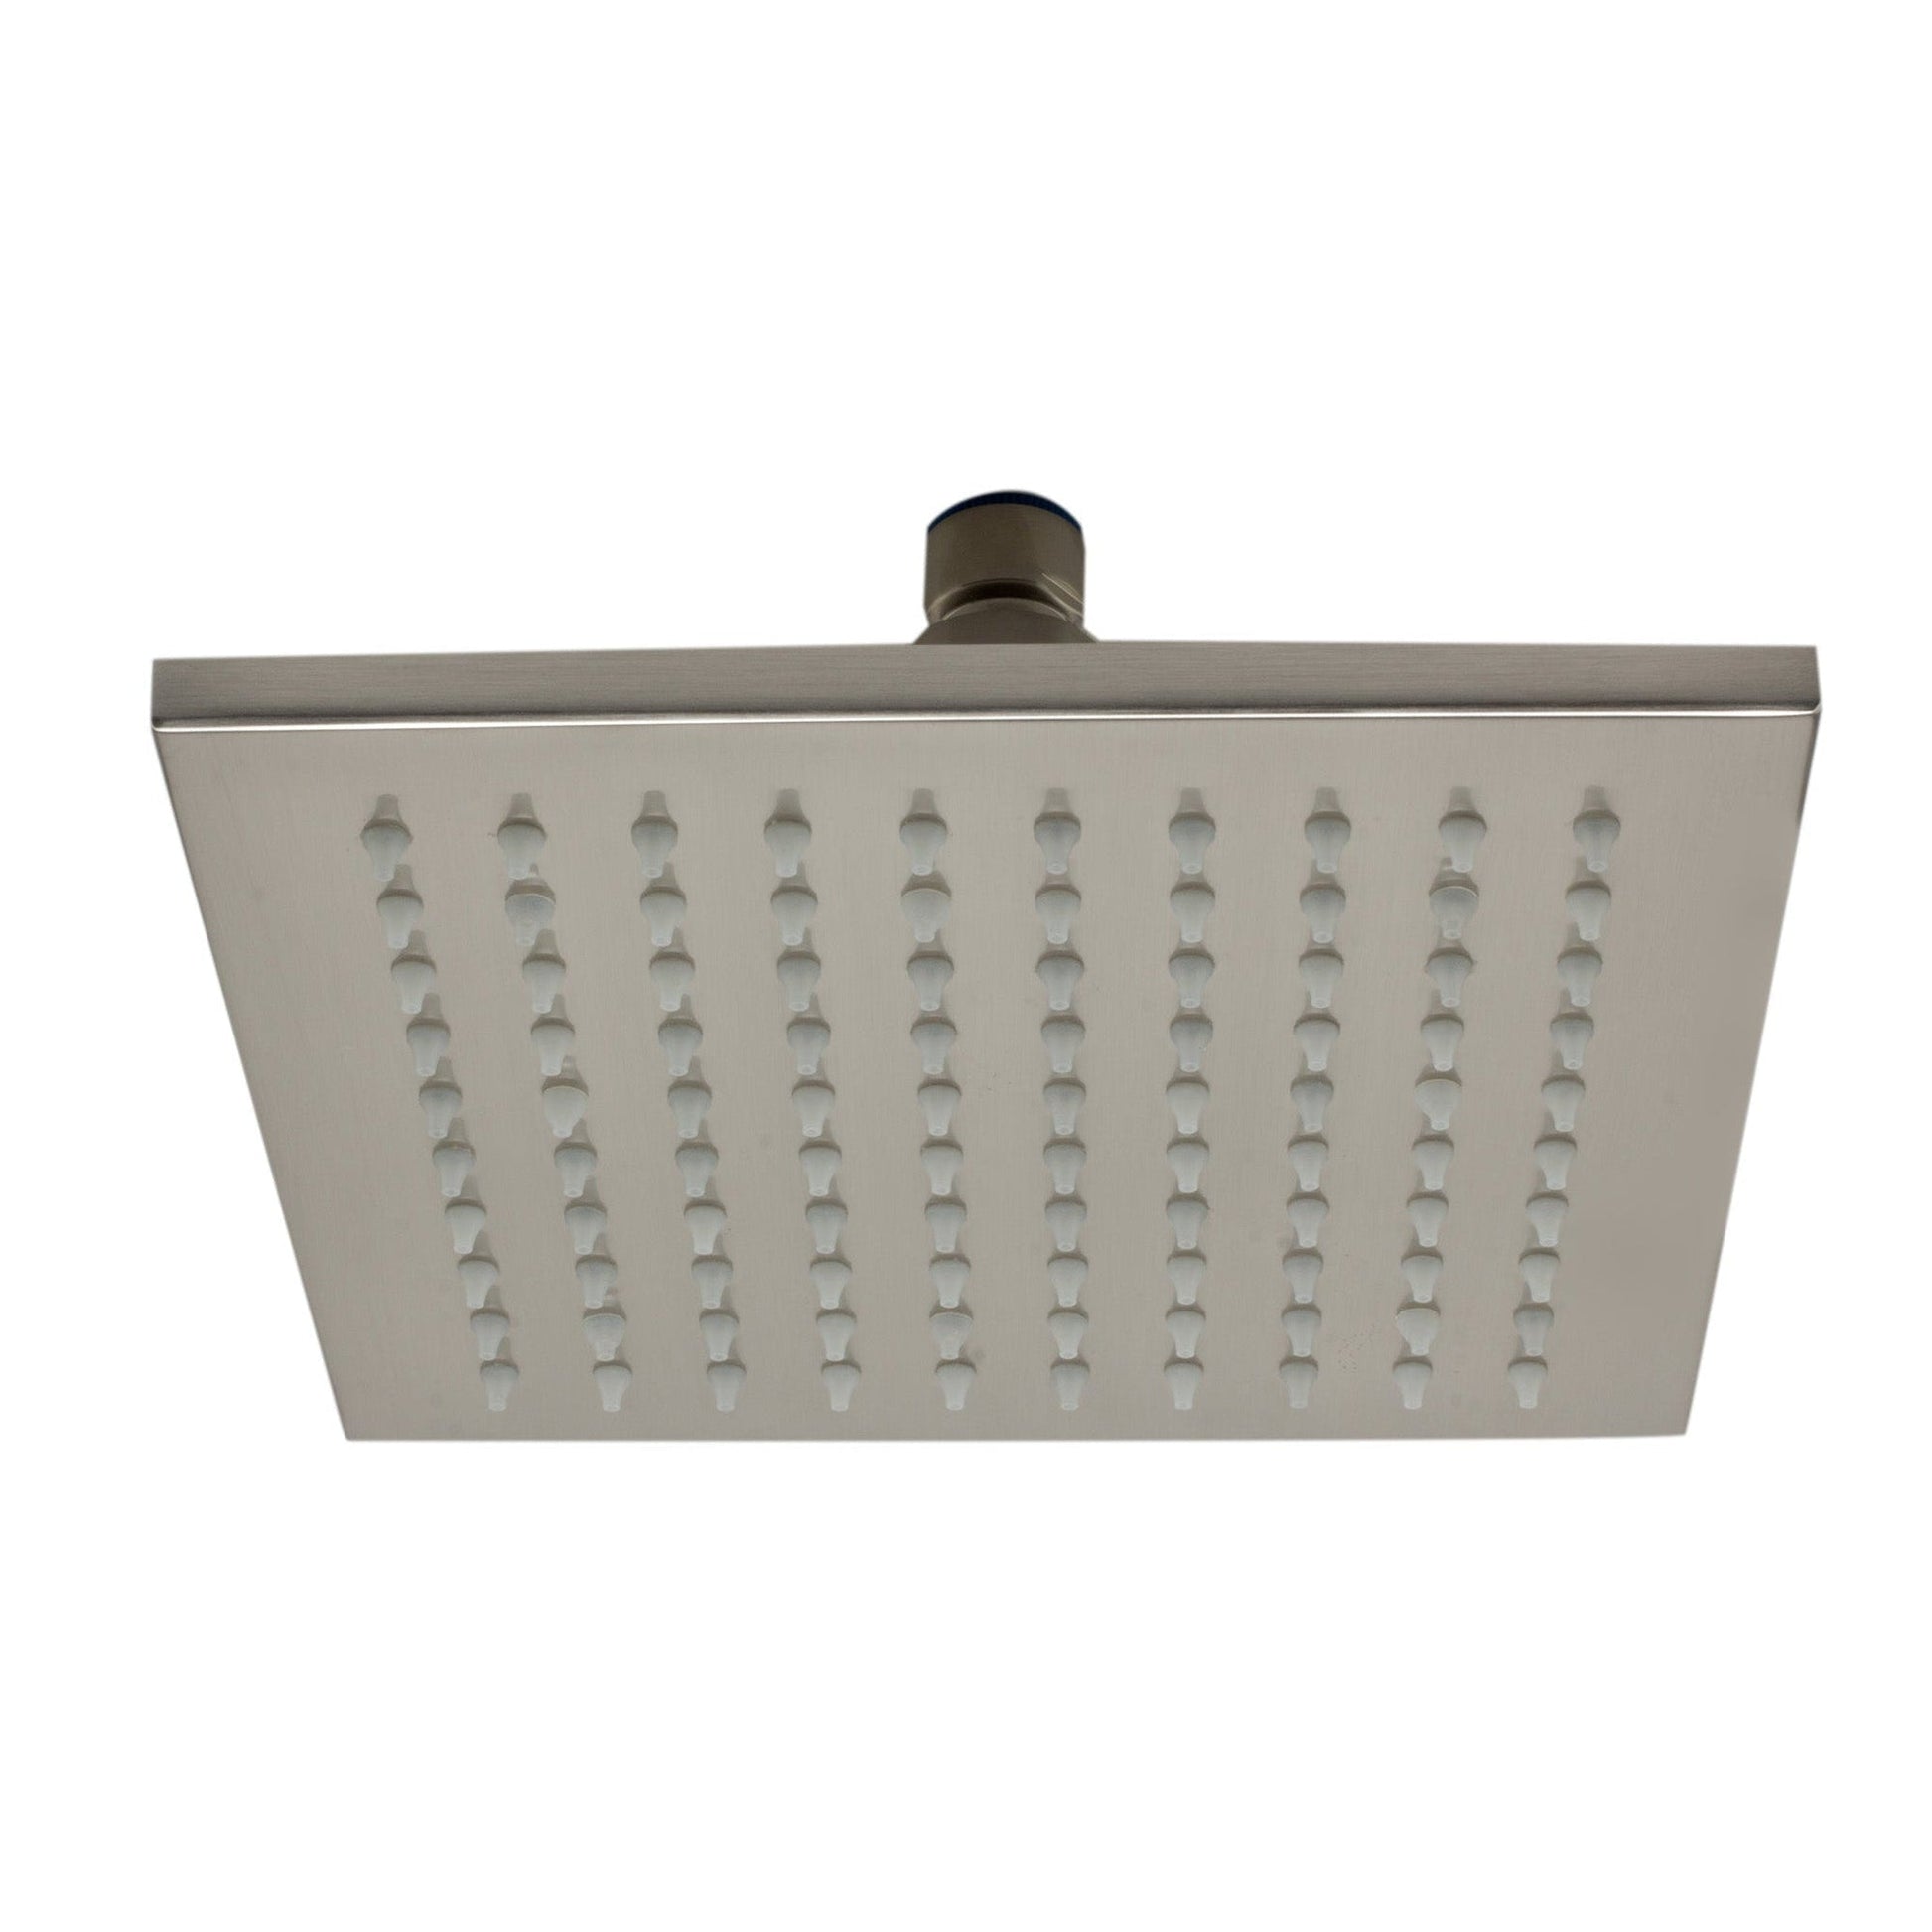 ALFI Brand LED8S-BN 8" Square Brushed Nickel Wall or Ceiling Mounted Multi Color LED Brass Rain Shower Head